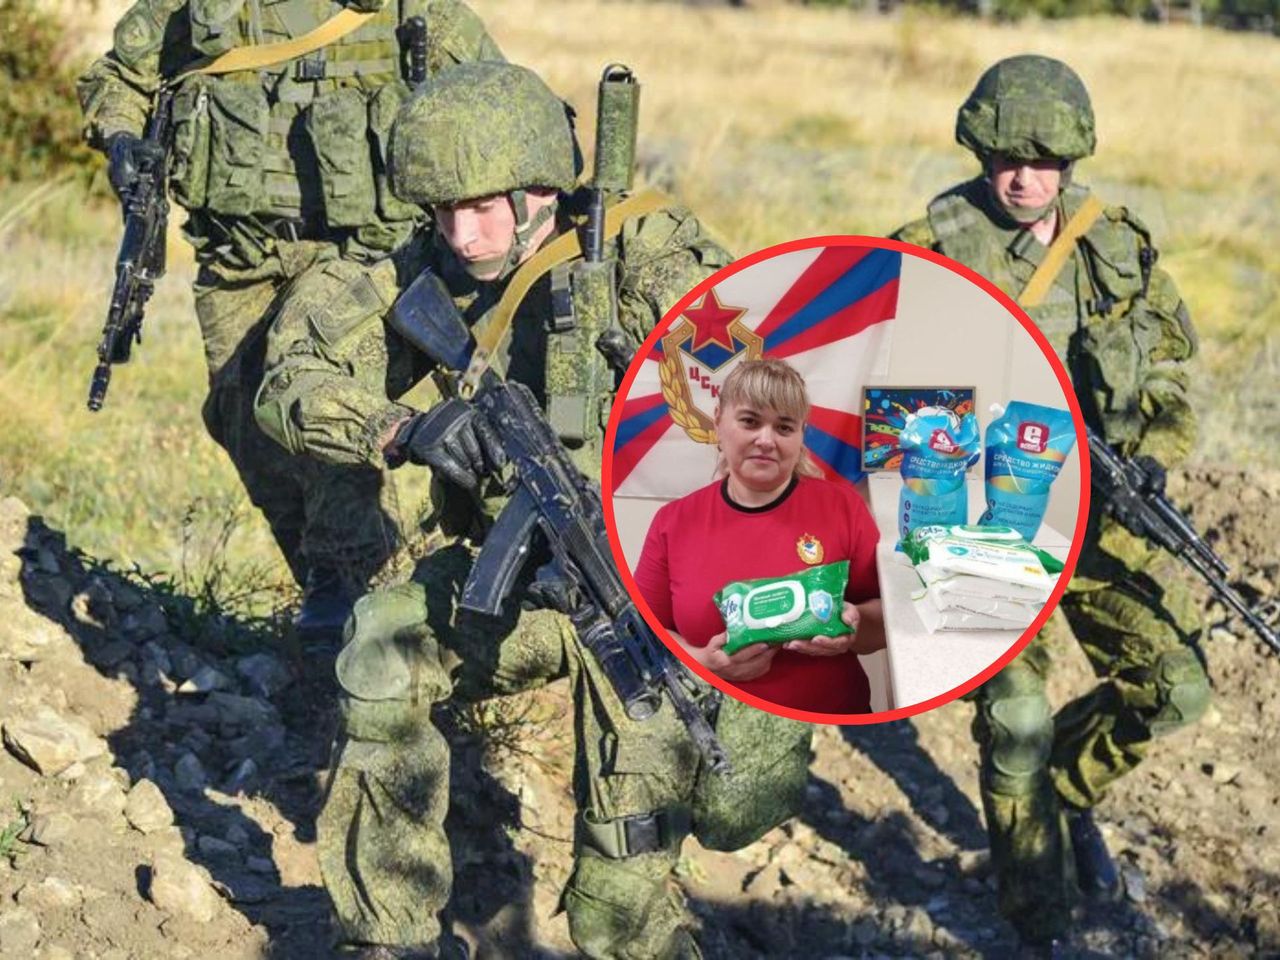 Liquid soap and moisturised wet wipes - these are the gifts for the soldiers from the Russians